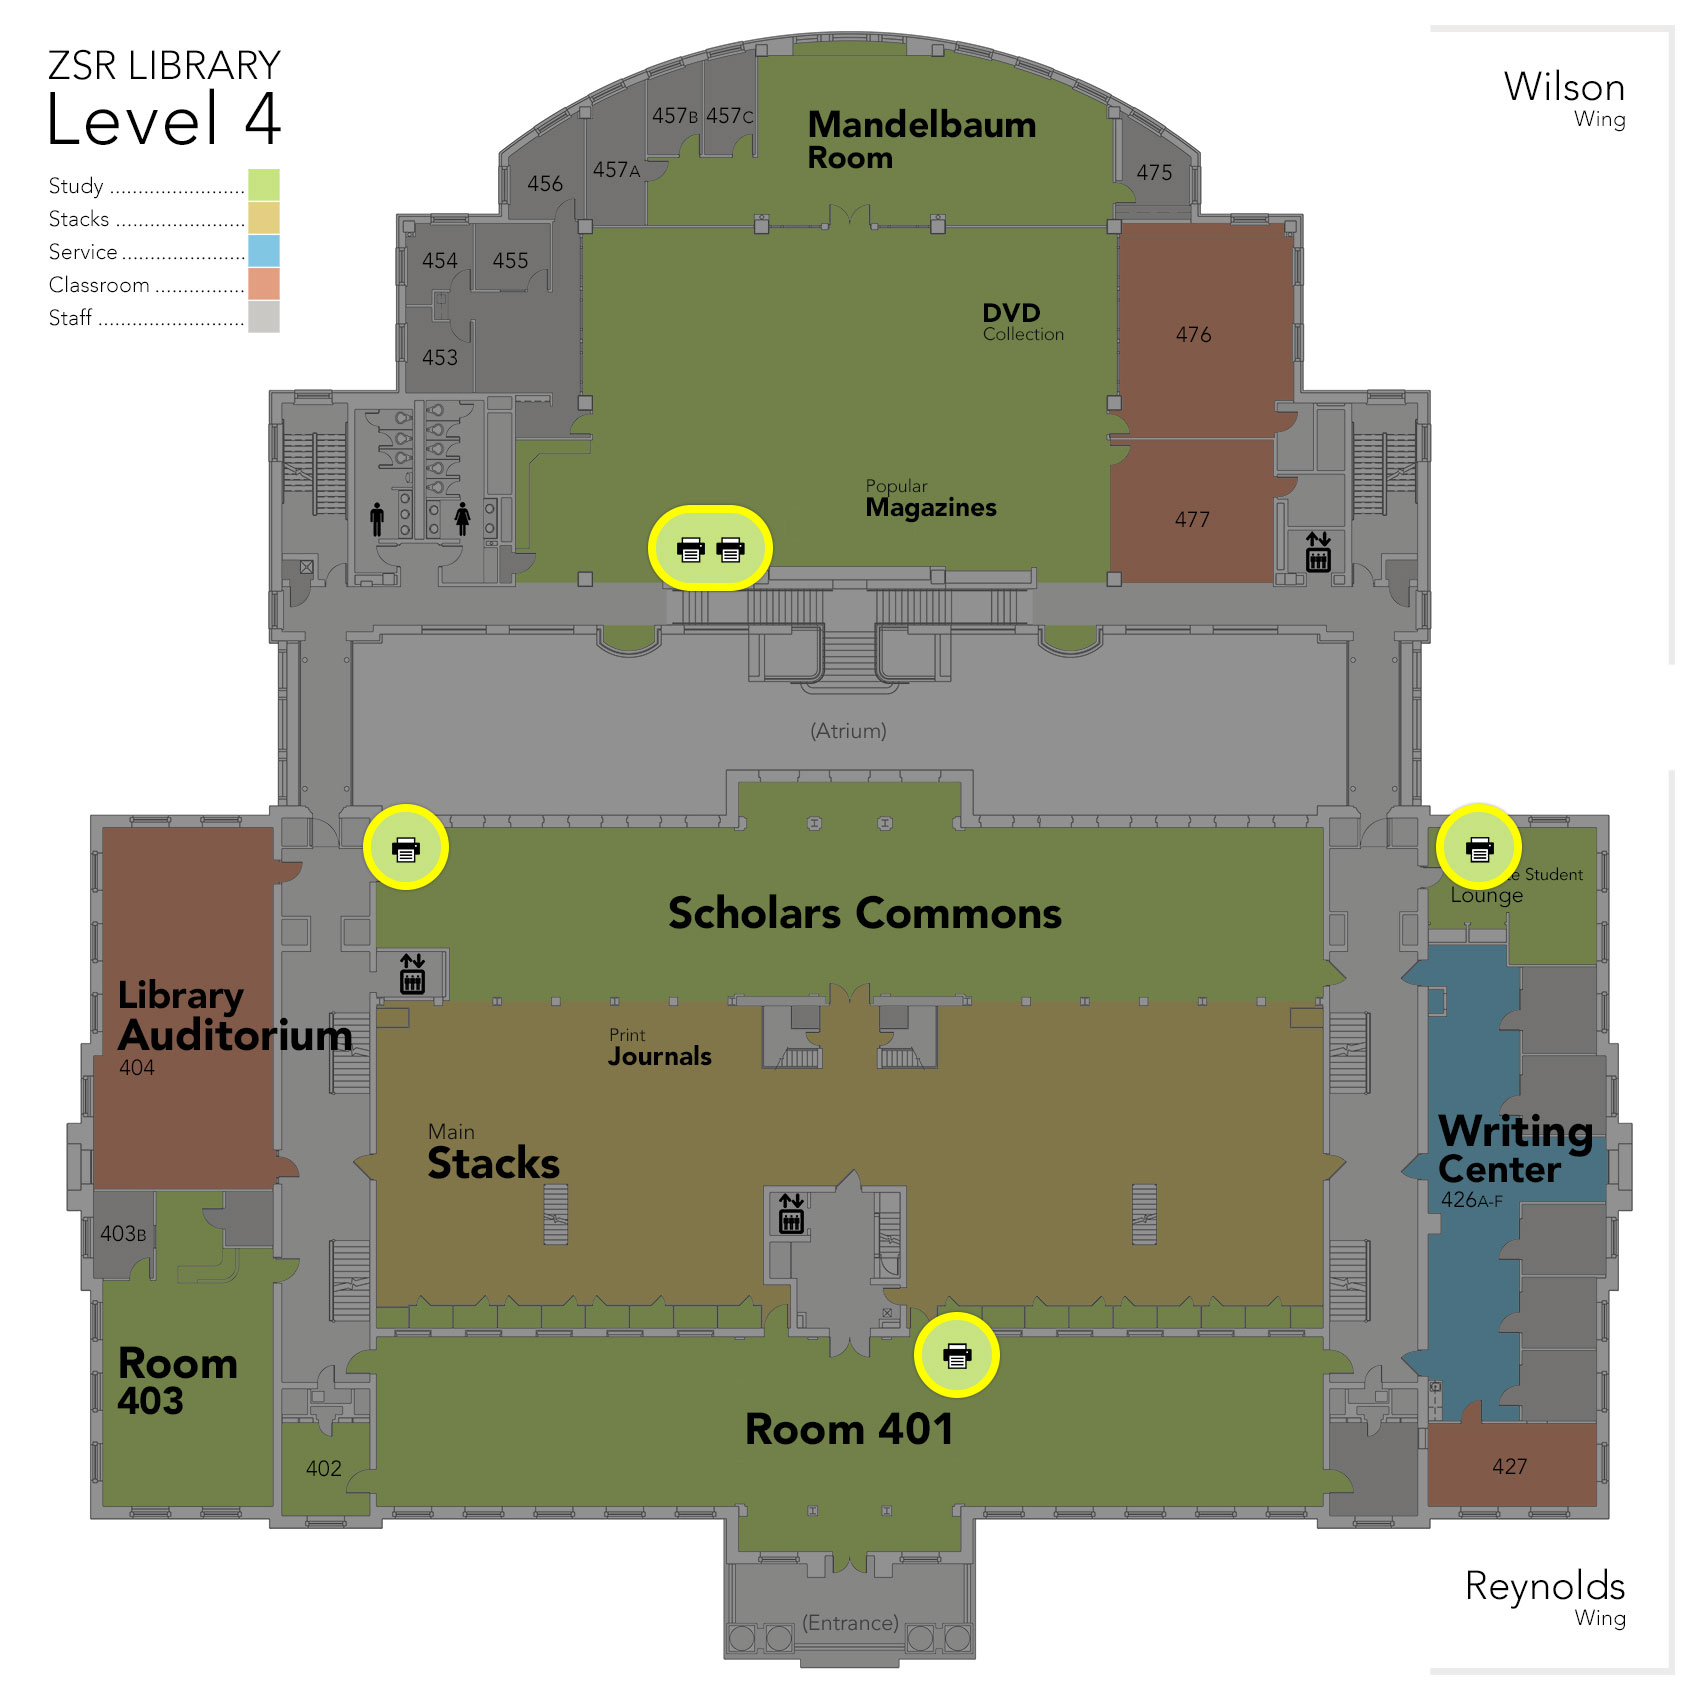 Locations of printers on Level 4